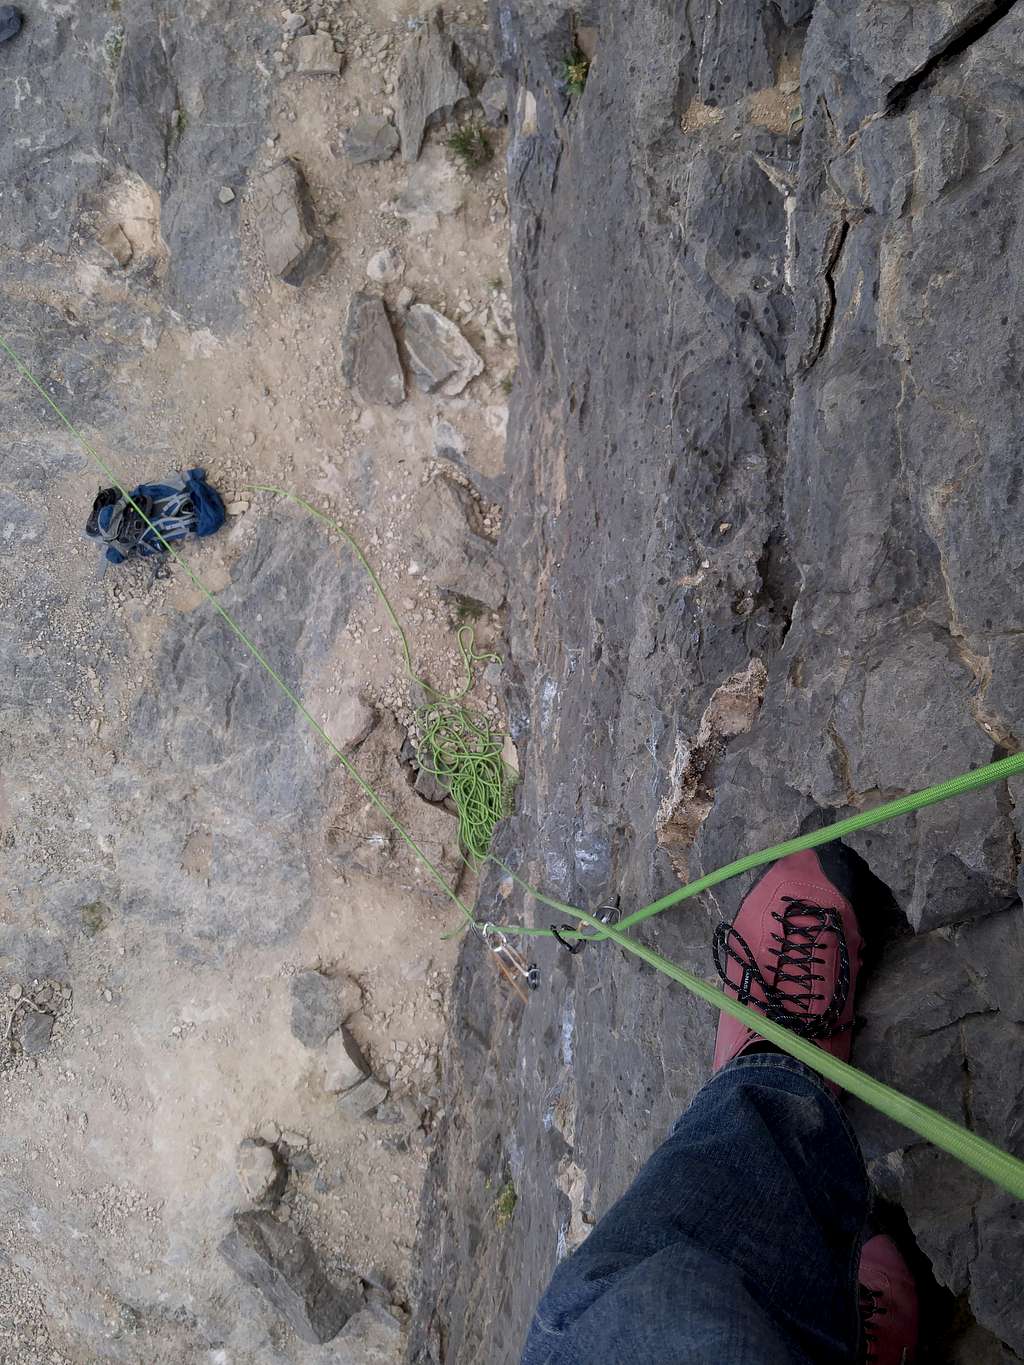 Looking Down After Pulling the Crux on Bushmaster